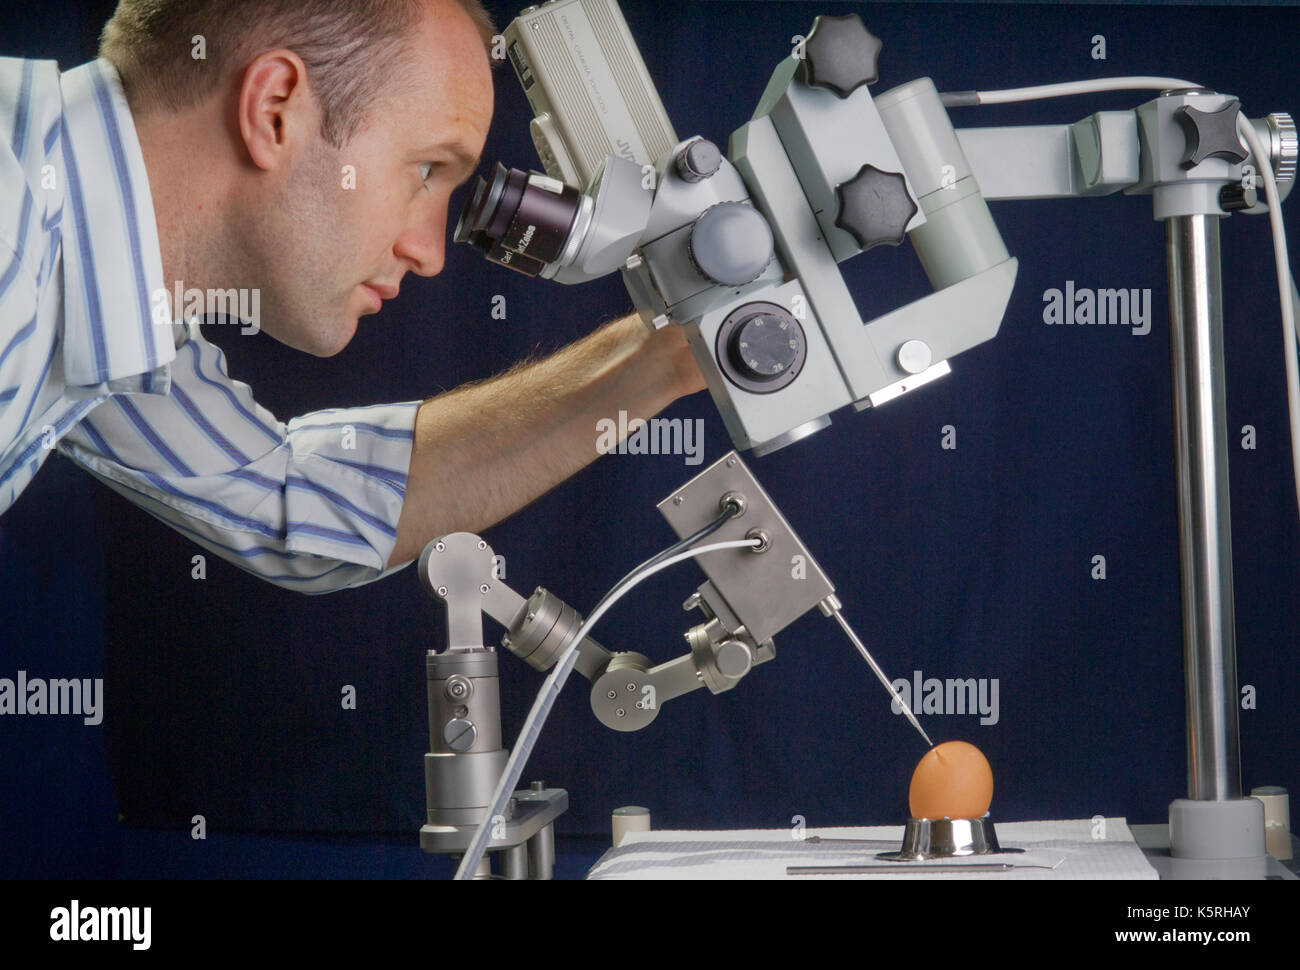 Demonstration of a smart robotic micro-drill, intended for surgical use. Stock Photo